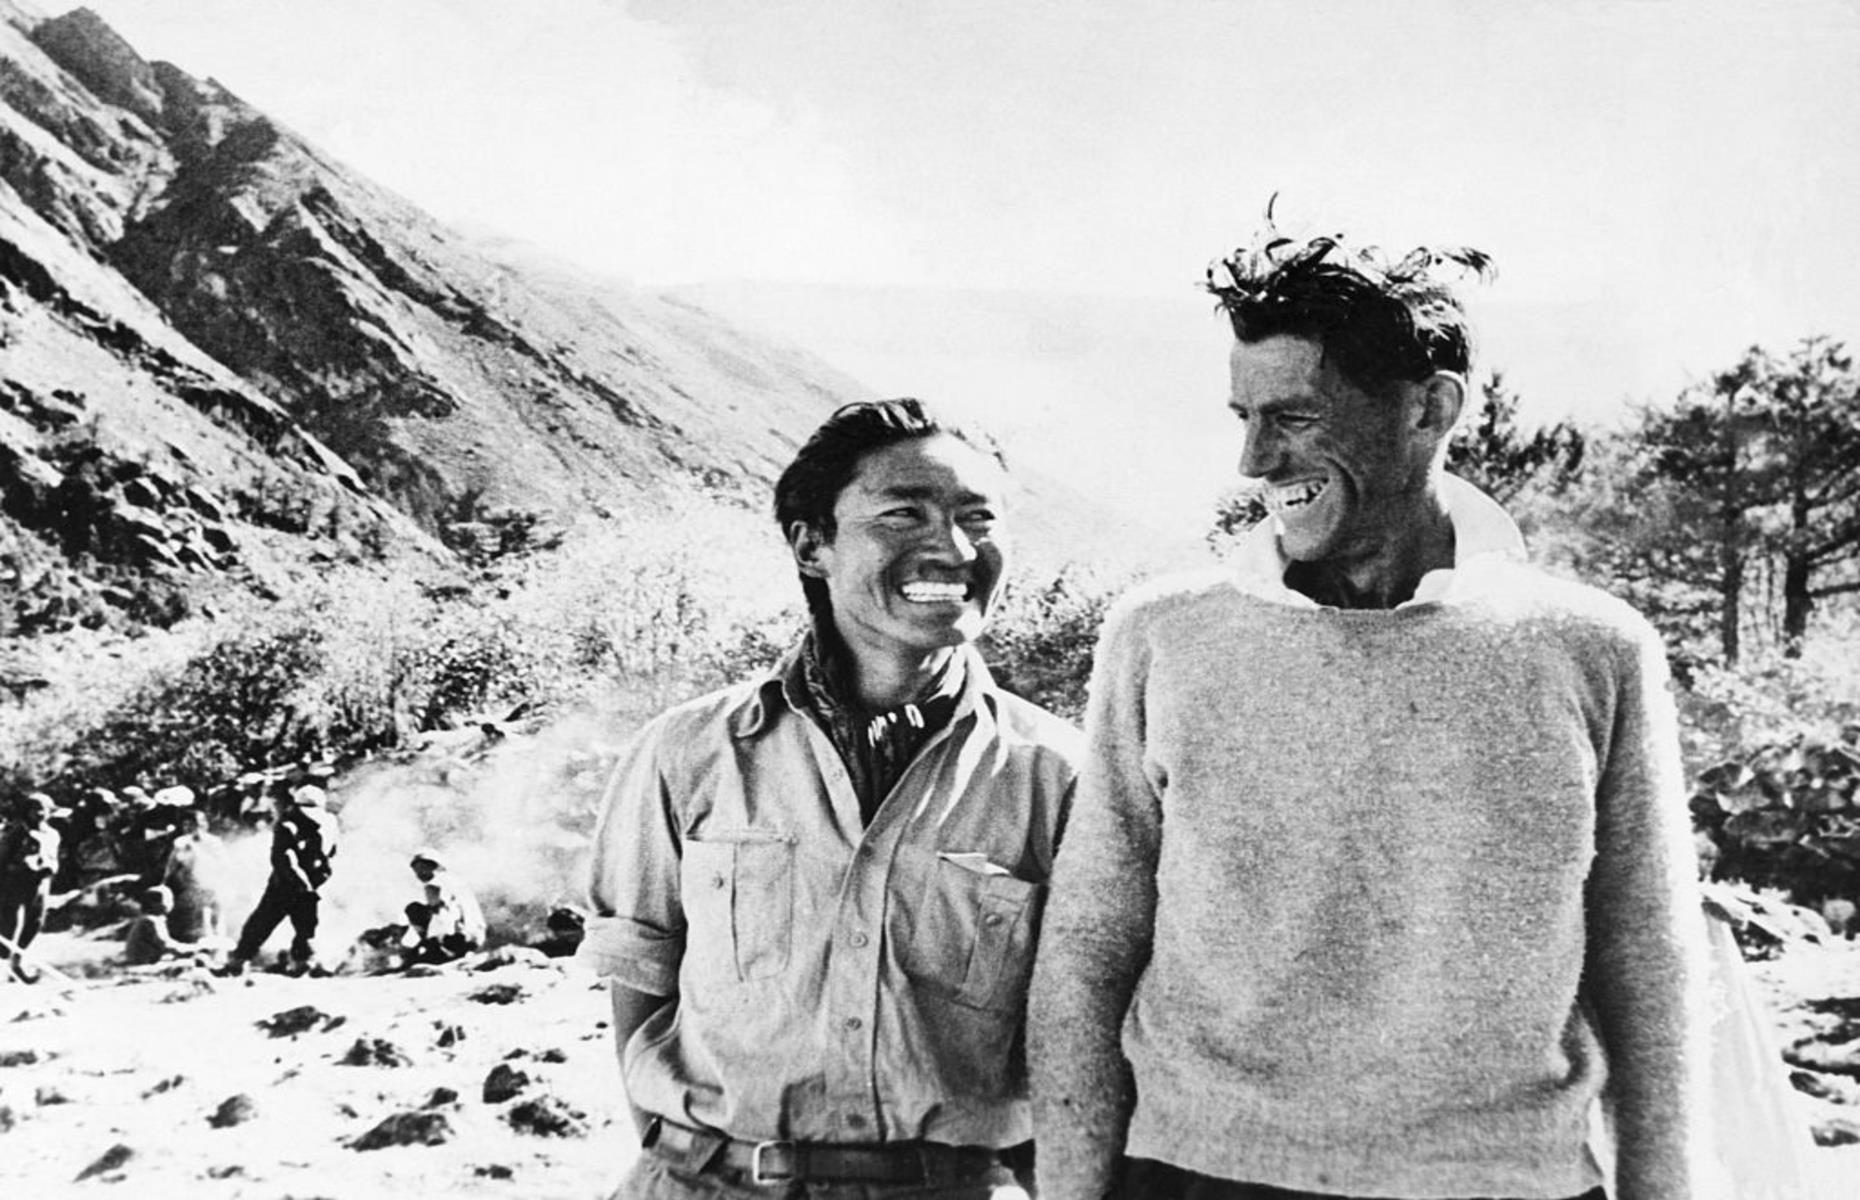 <p>The pair, pictured here, made history succeeding where many others had failed before them. While Hillary, who died in 2008, is best remembered for his mountaineering, he also made an expedition to the Antarctic. In 1958 he led the New Zealand team of the Commonwealth Trans-Antarctic Expedition (TAE) to become the first person to see the South Pole since Scott in 1912 and the first to get there by vehicle.</p>